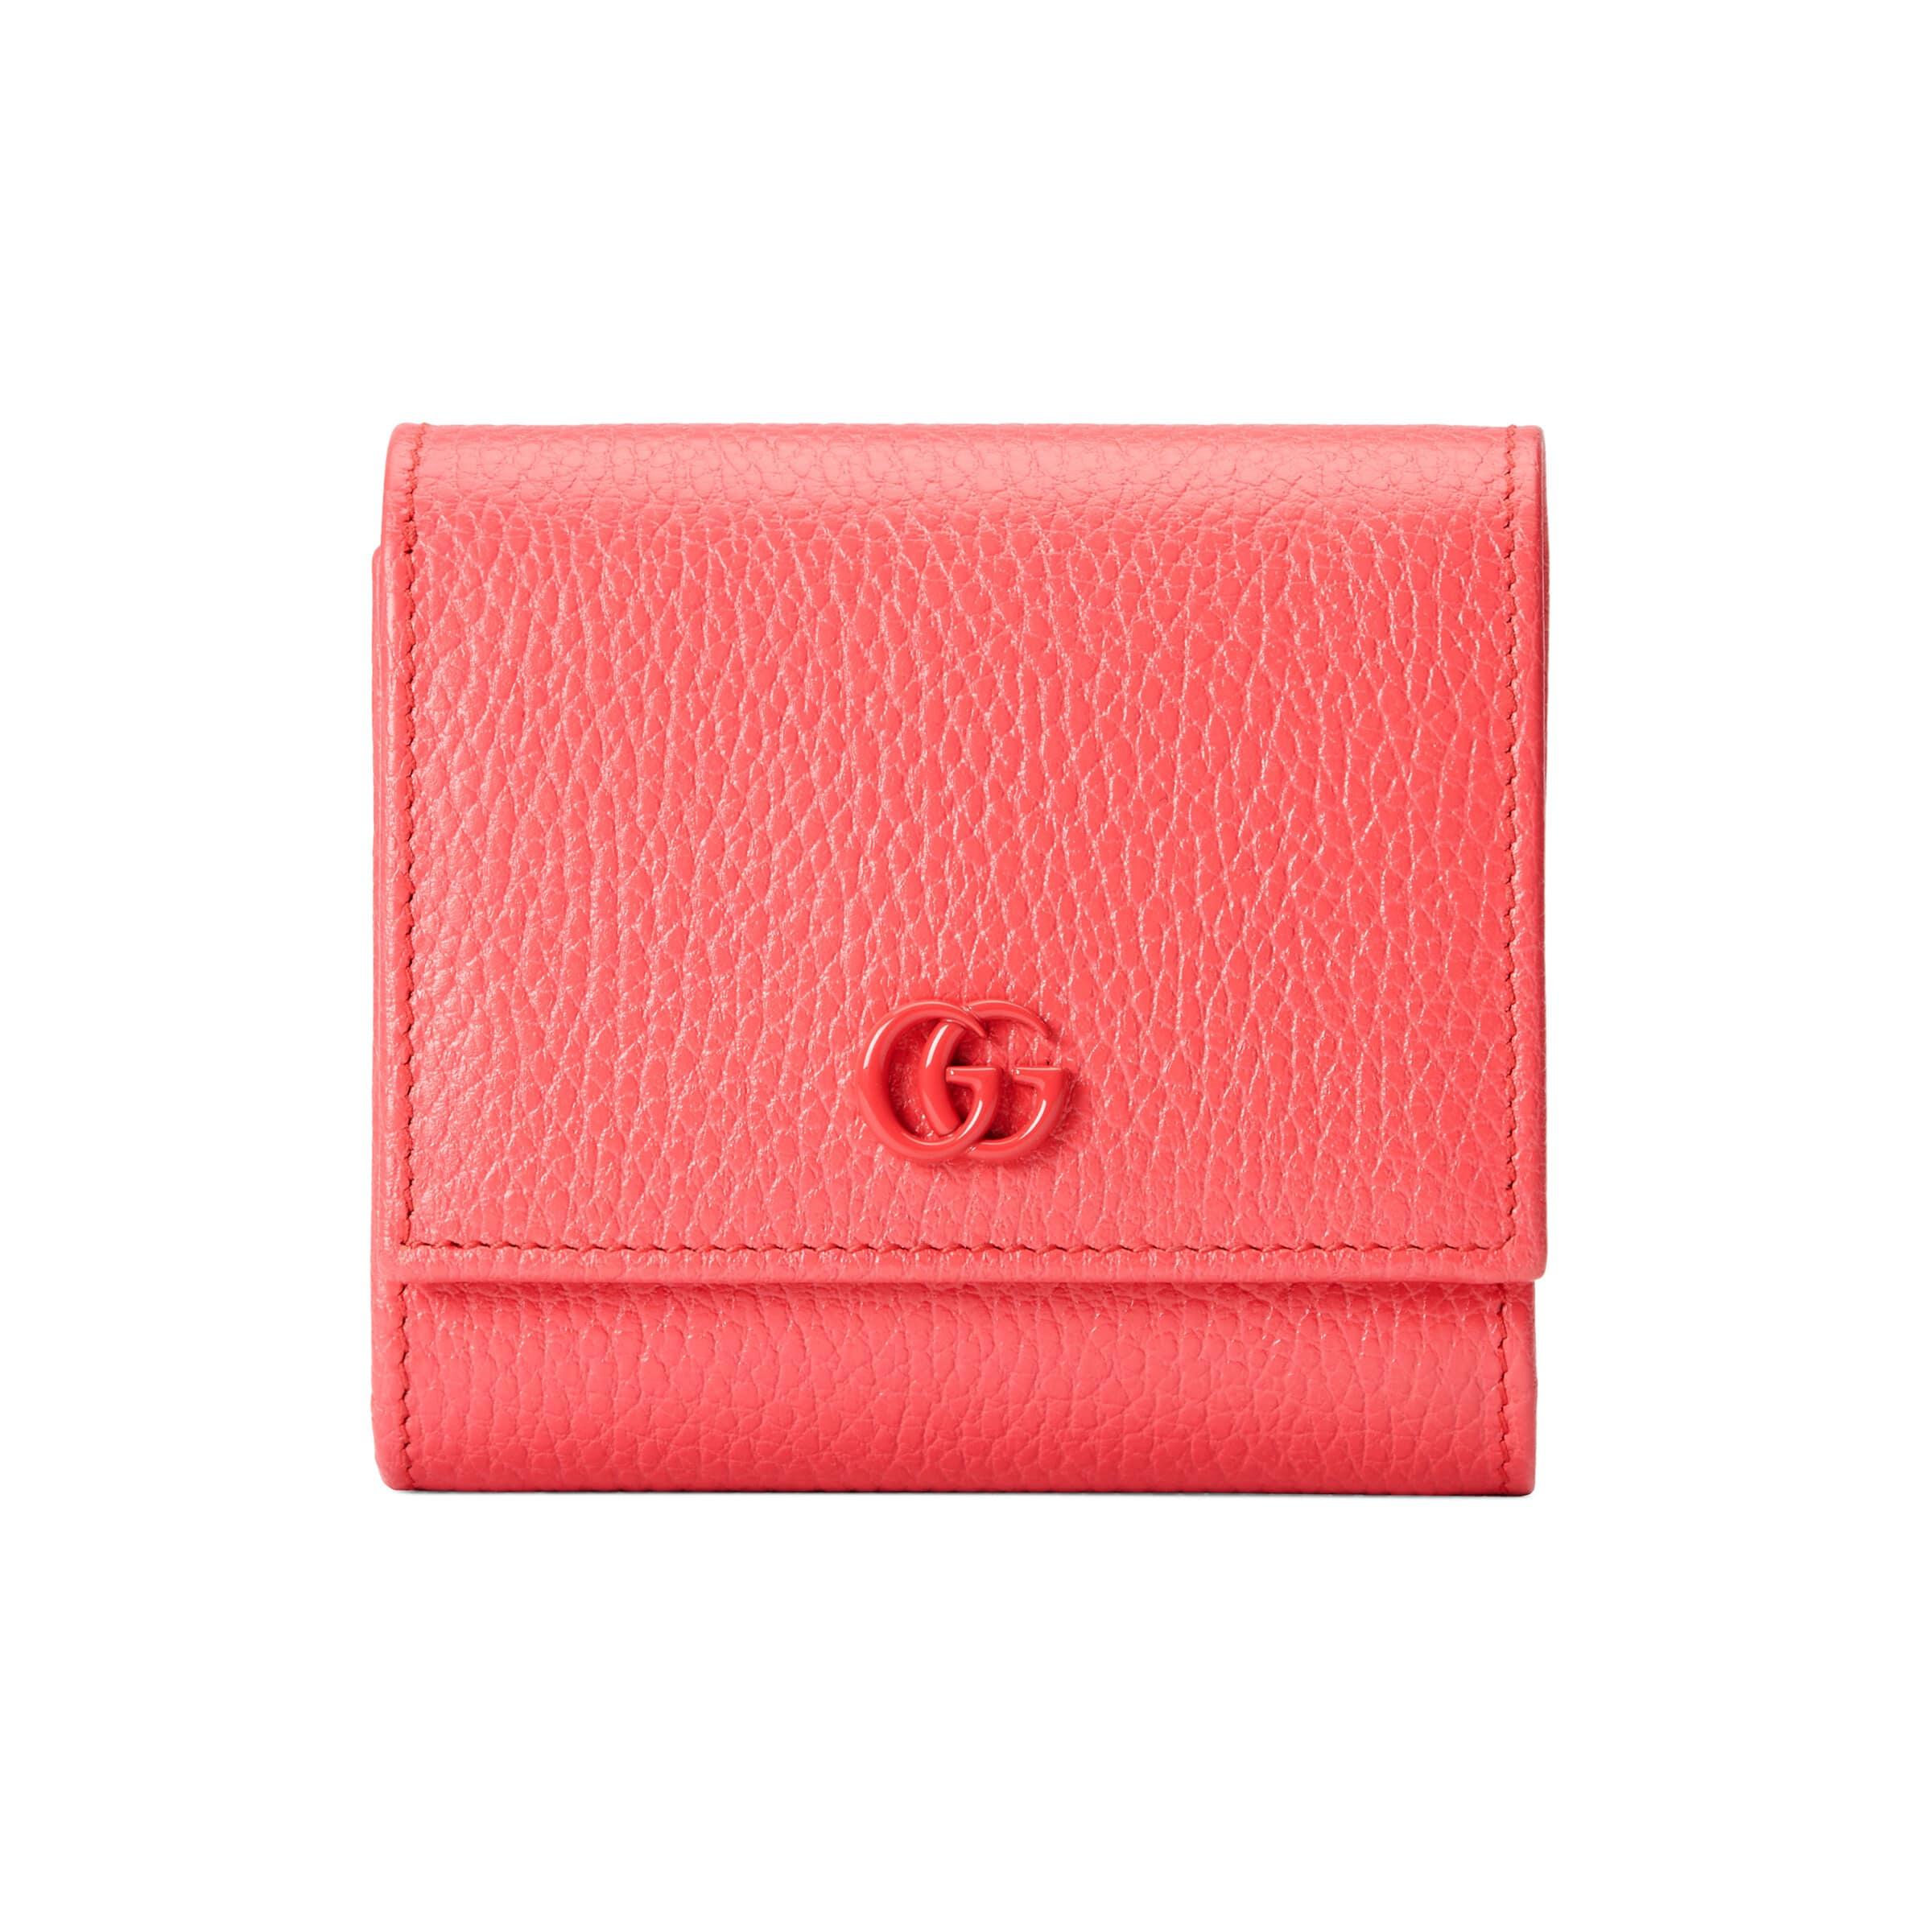 Gucci GG Marmont Medium Wallet in Pink | Lyst